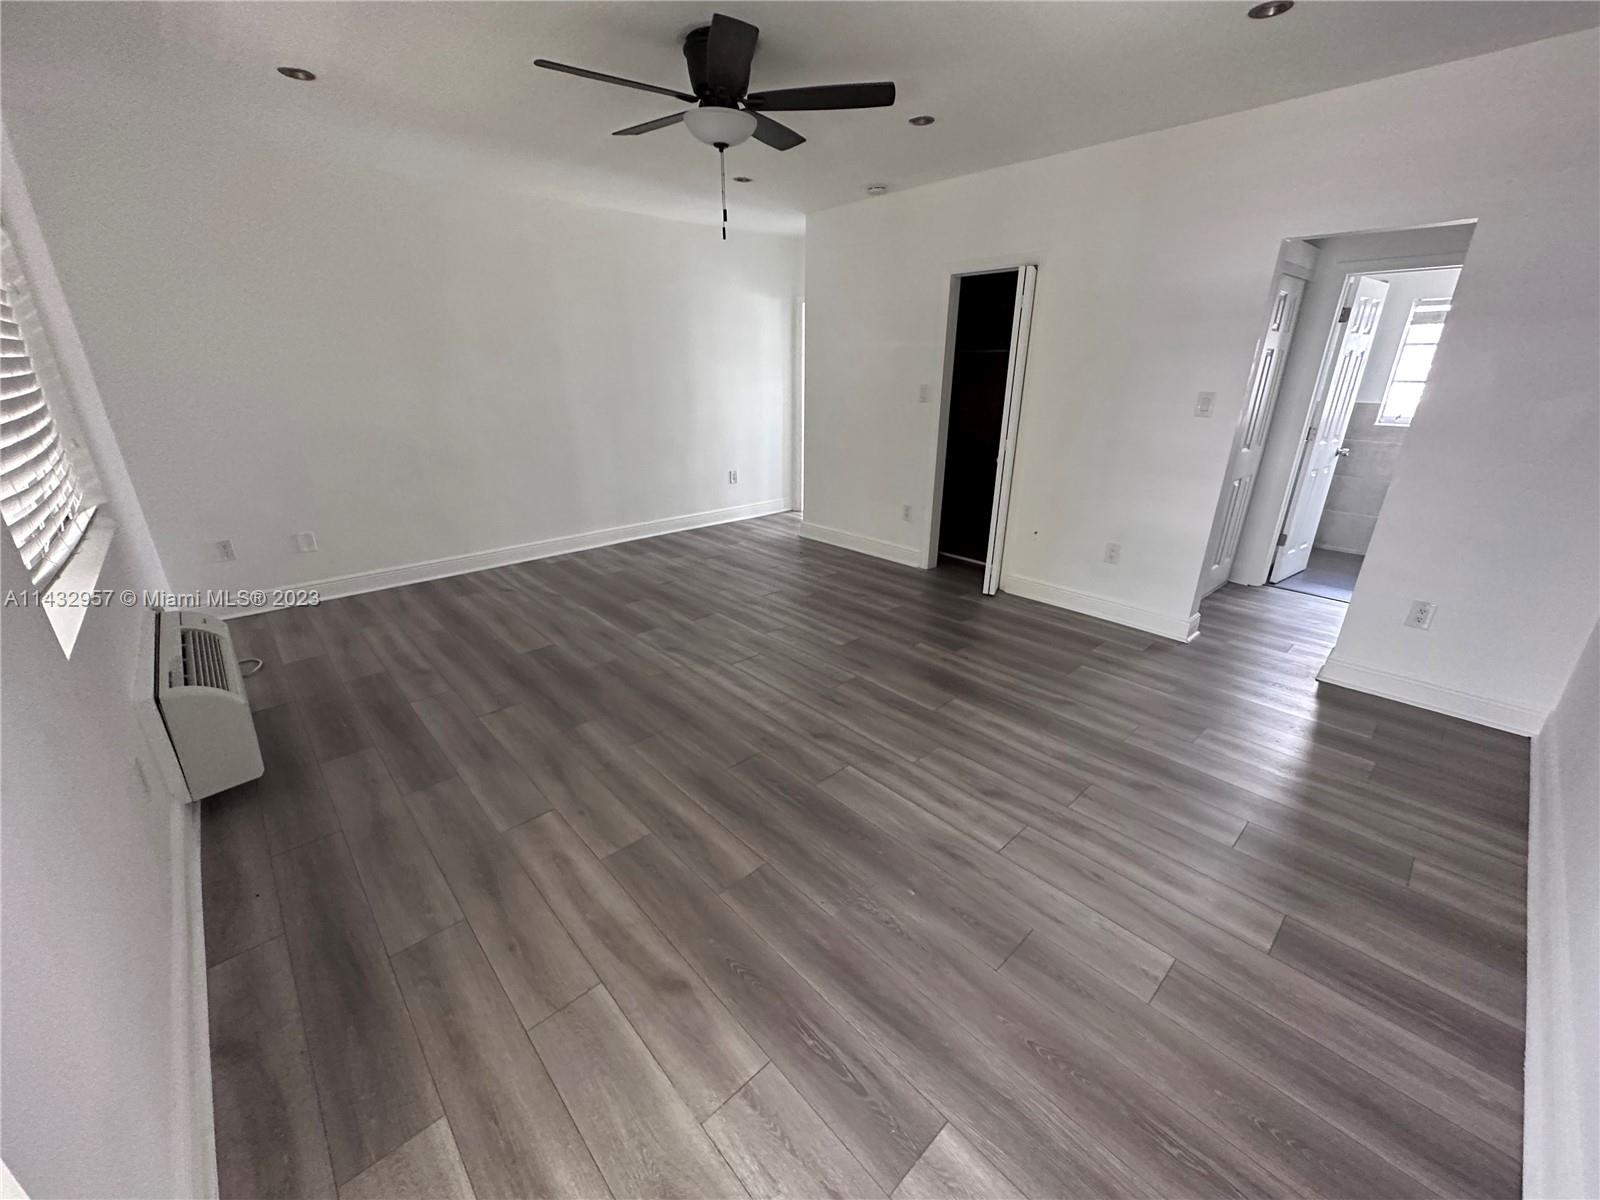 Studio close to Miami Beaches. Not assigned parking, excellent conditions. Unit features gas range, oven, refrigerator, NO MICROWAVE. Utilities included, only water and garbage. DOES NOT INCLUDE SERVICE GAS. Building features on-site laundry, secured entrance, and lots of parking in street. Easy to show and fast approval process.